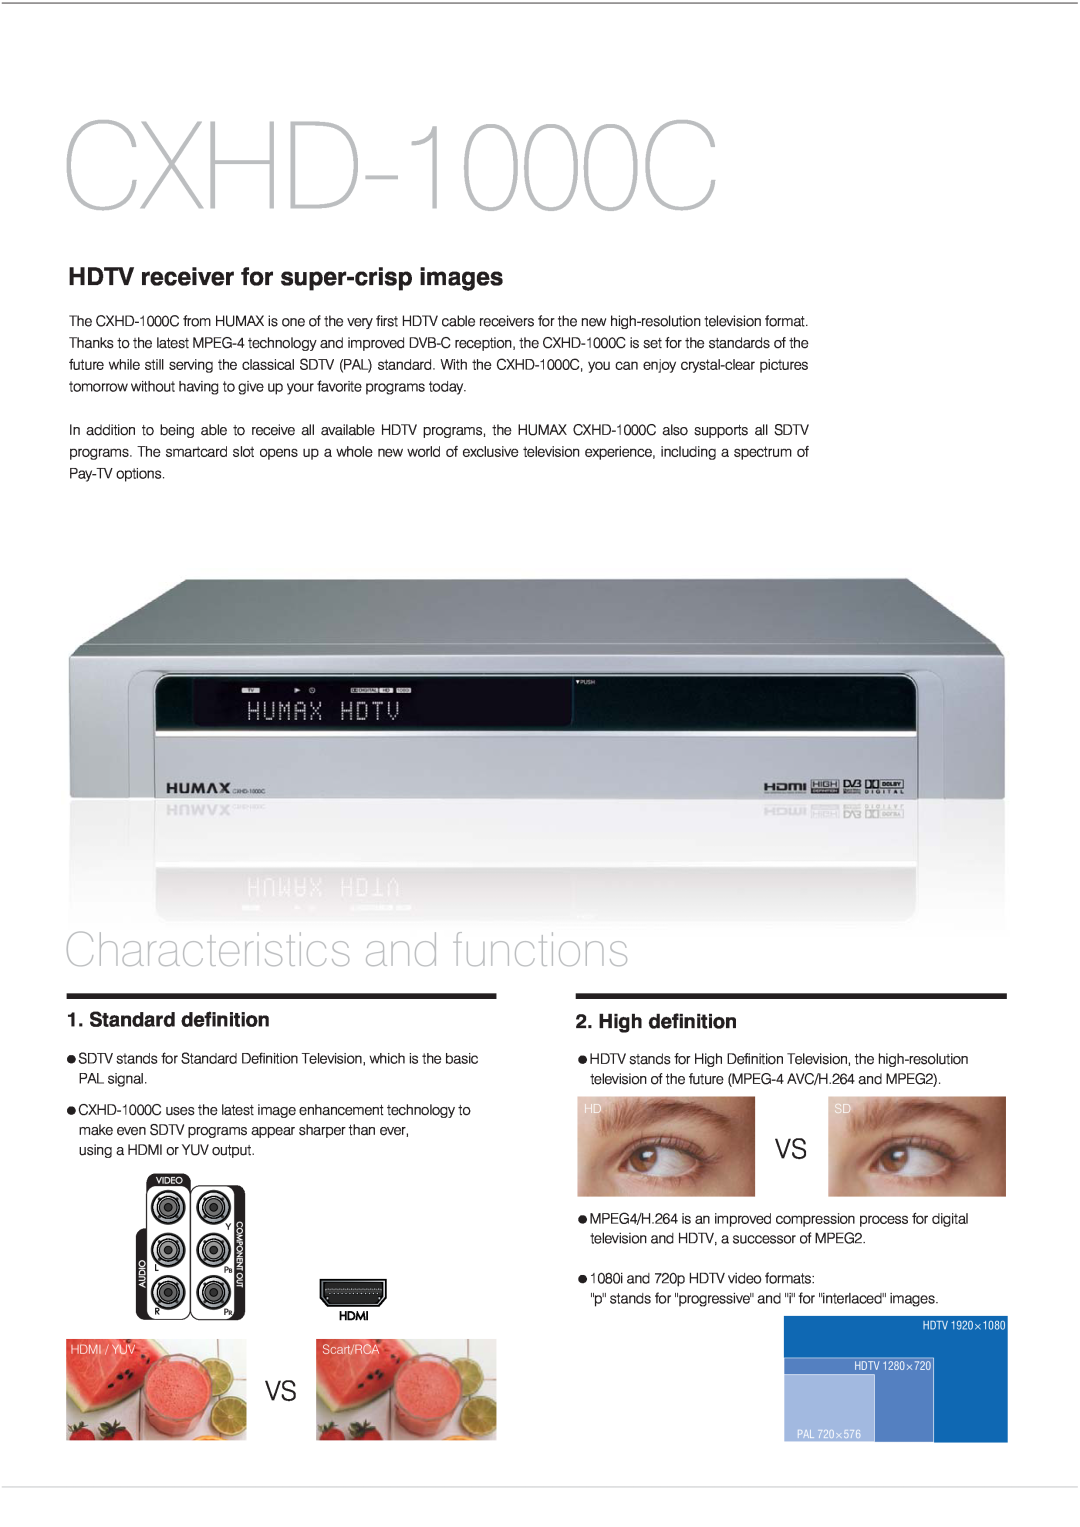 Humax CXHD-1000C Characteristics and functions, Standard definition, High definition, HDTV receiver for super-crisp images 